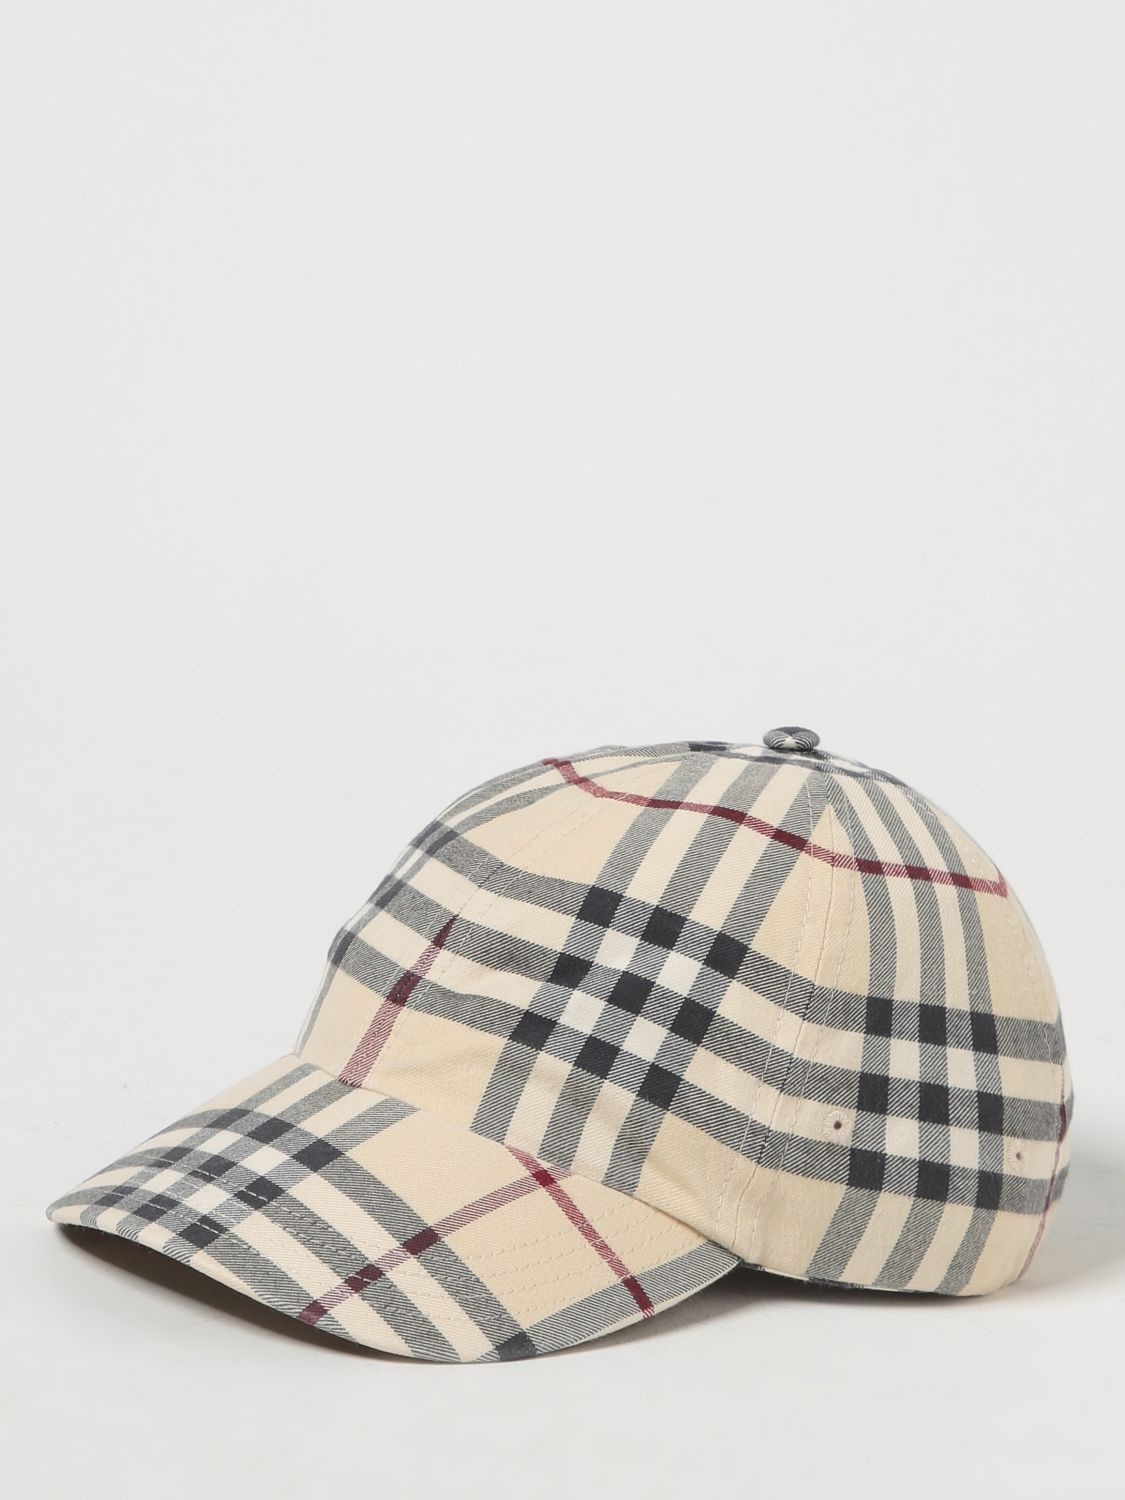 Burberry Vintage Check hat in jacquard cotton - 1